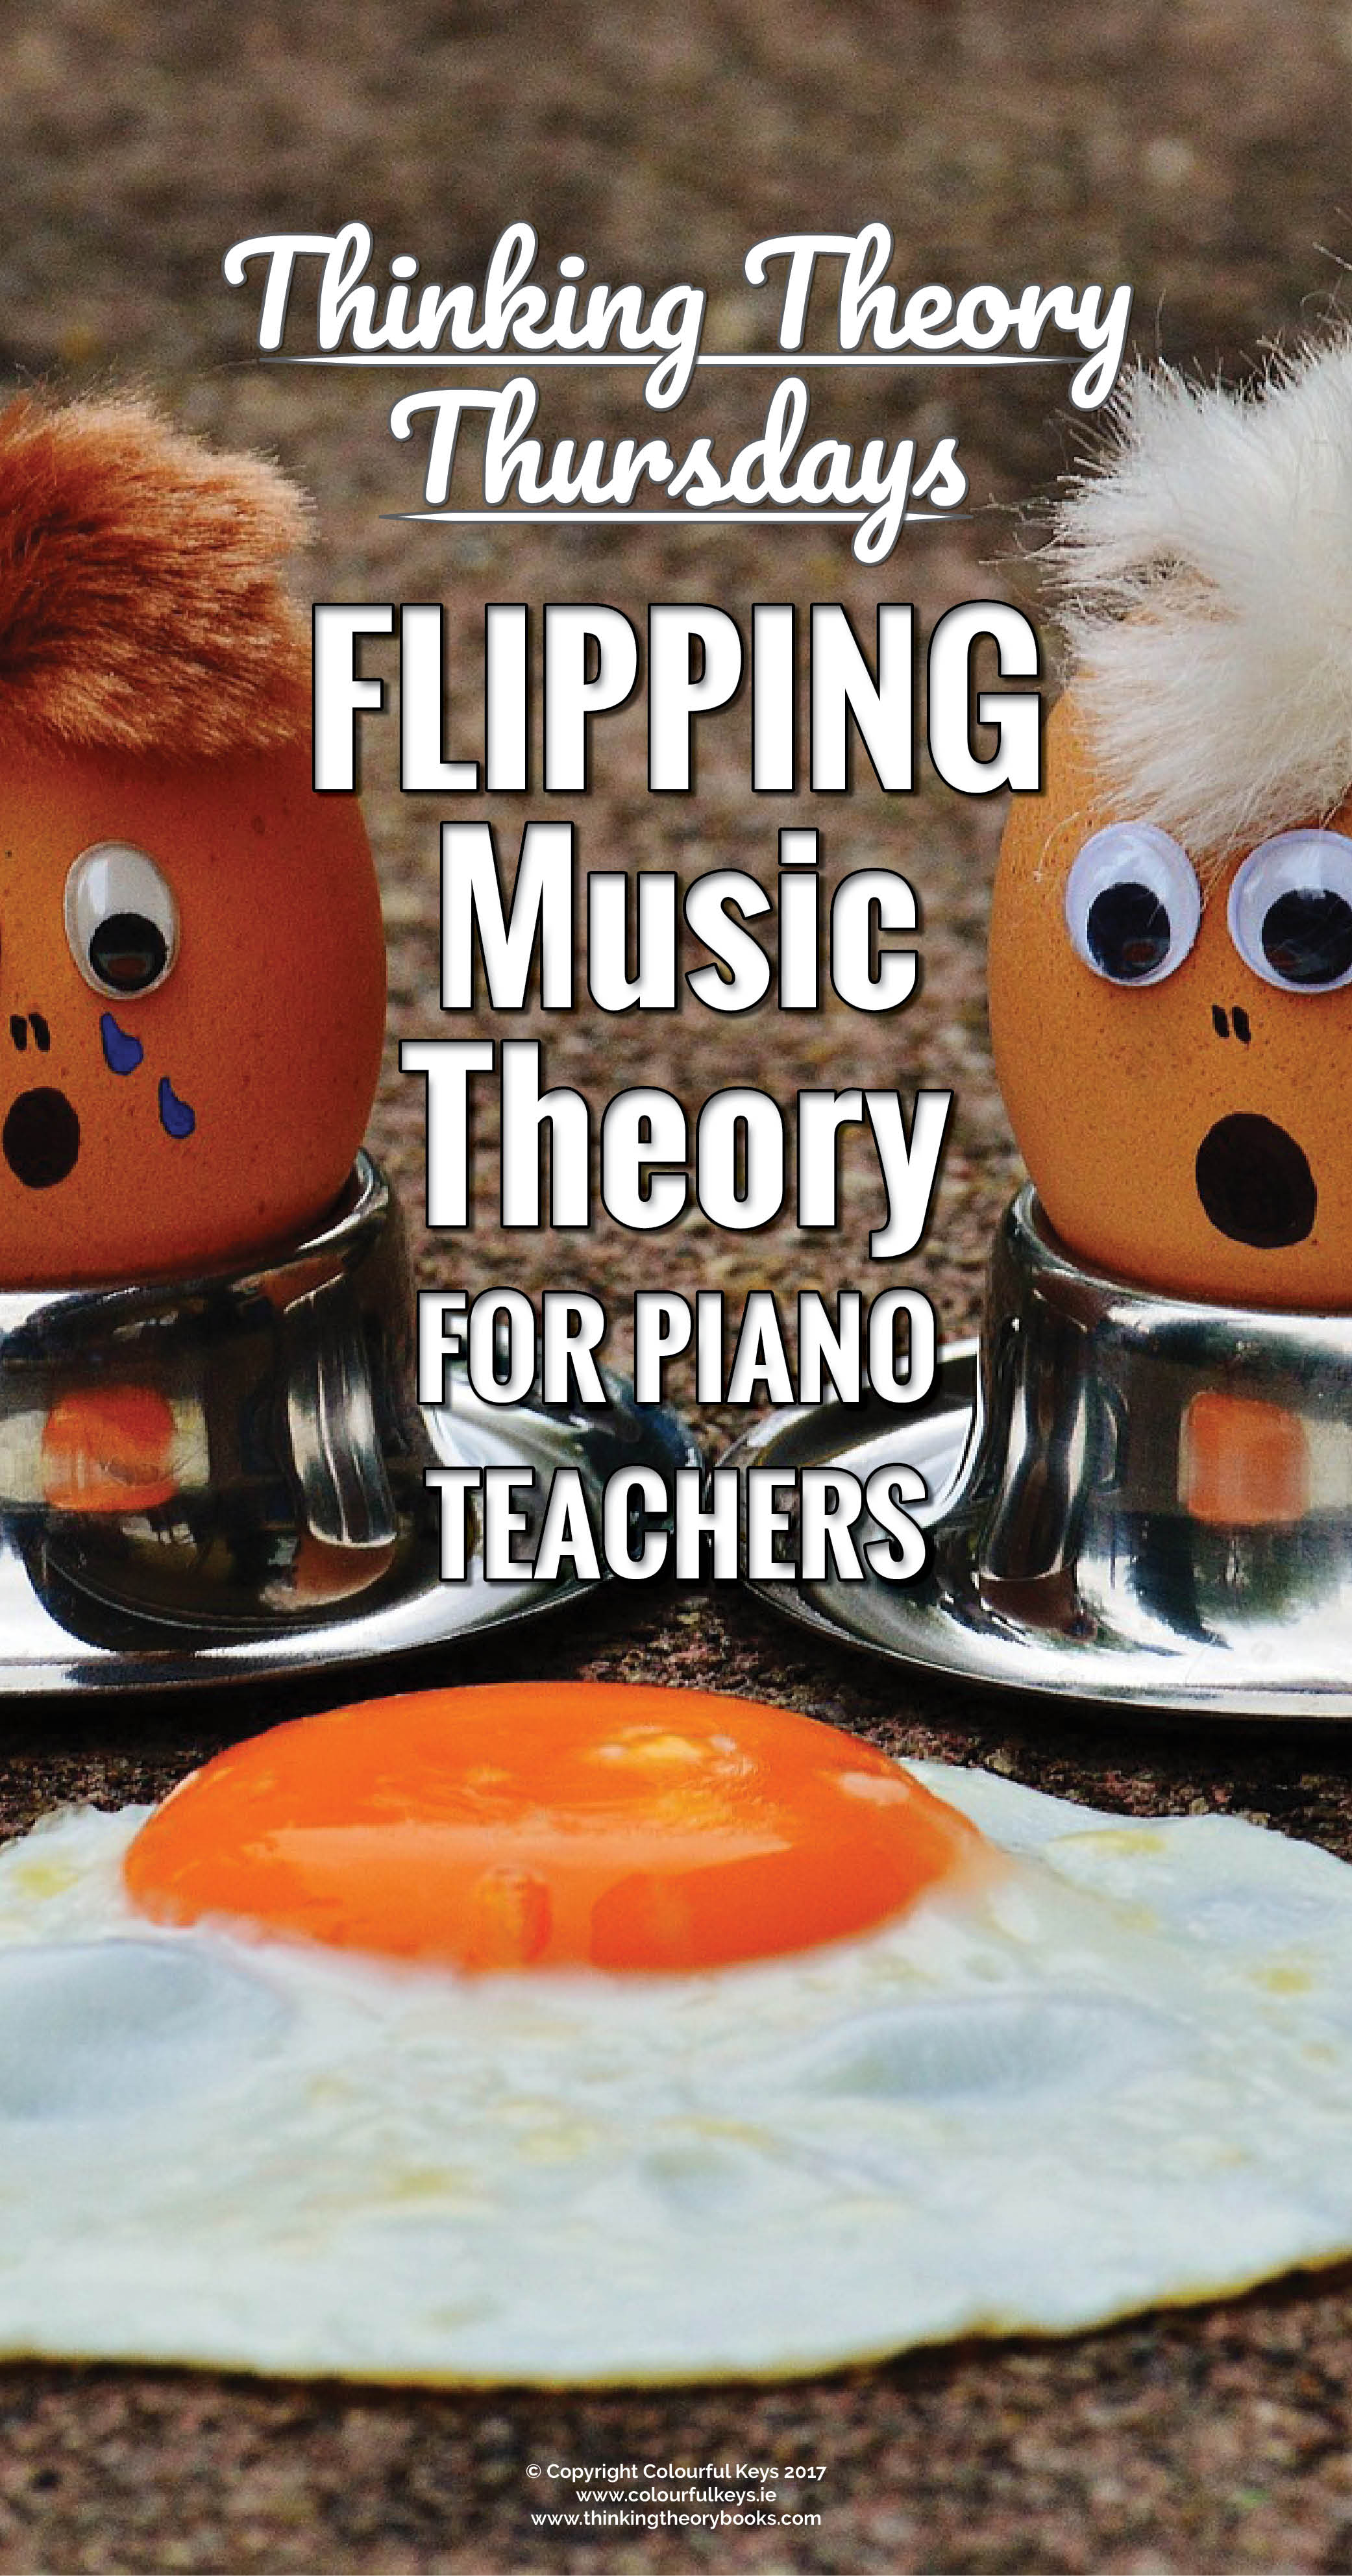 Flipping music theory for piano teachers and freeing up lesson time.